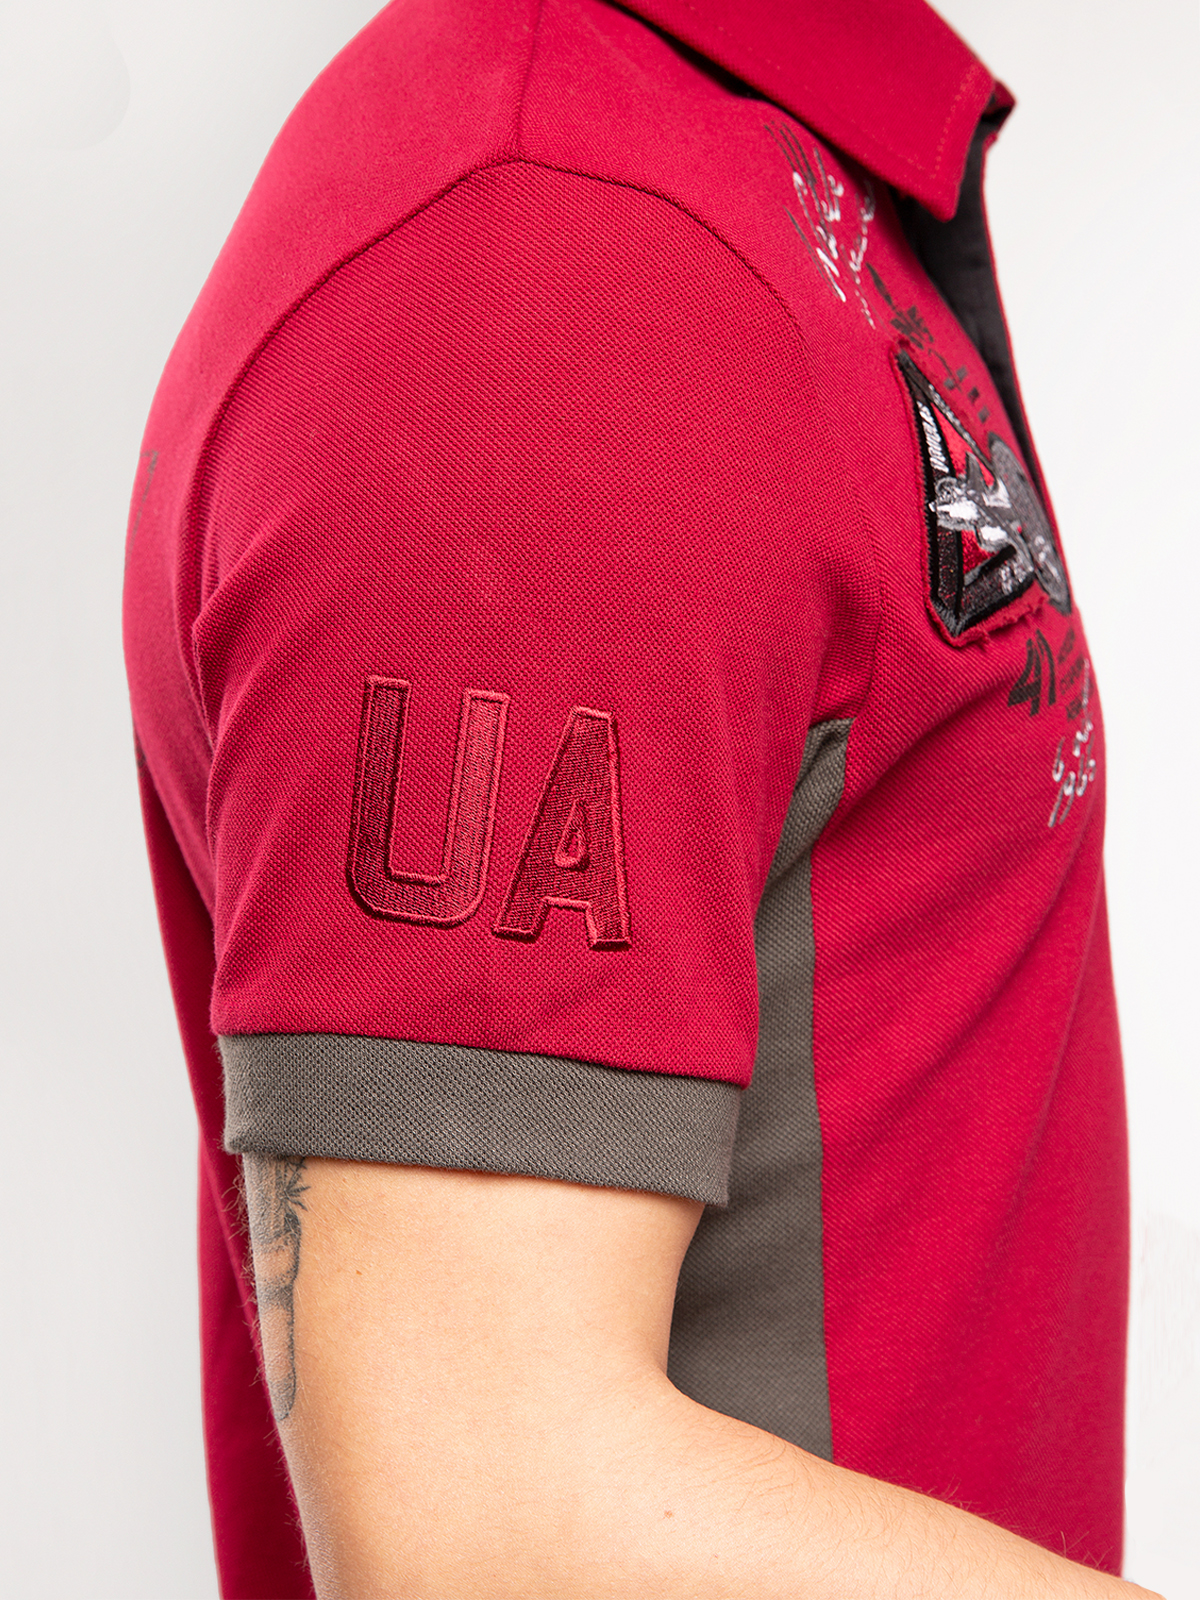 Women's Polo Shirt Flying Cossacks. Color claret. 
Size worn by the model: S.